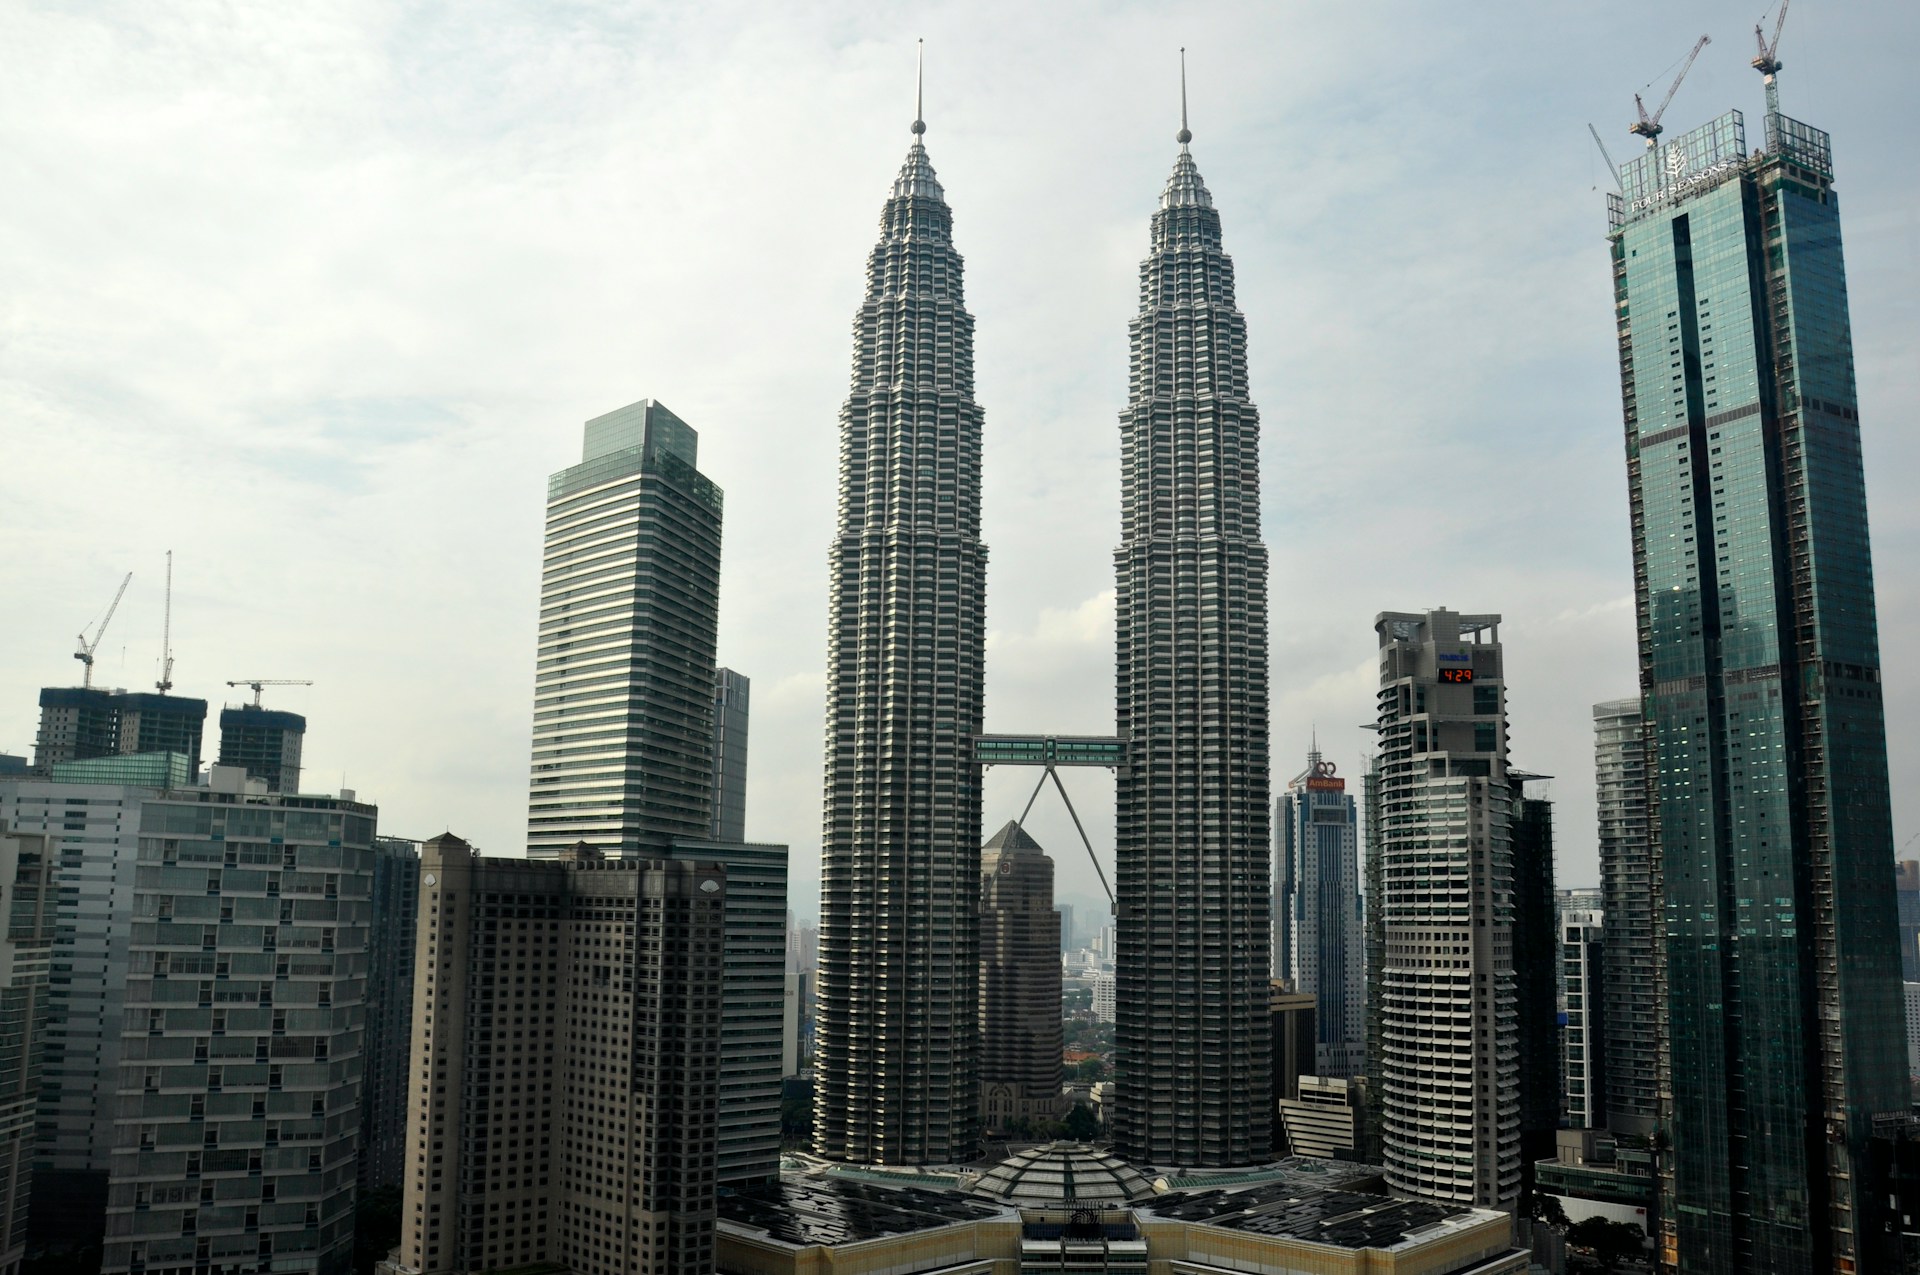 Extensions for Vessel Trio from Petronas Carigali Secured by Dayang